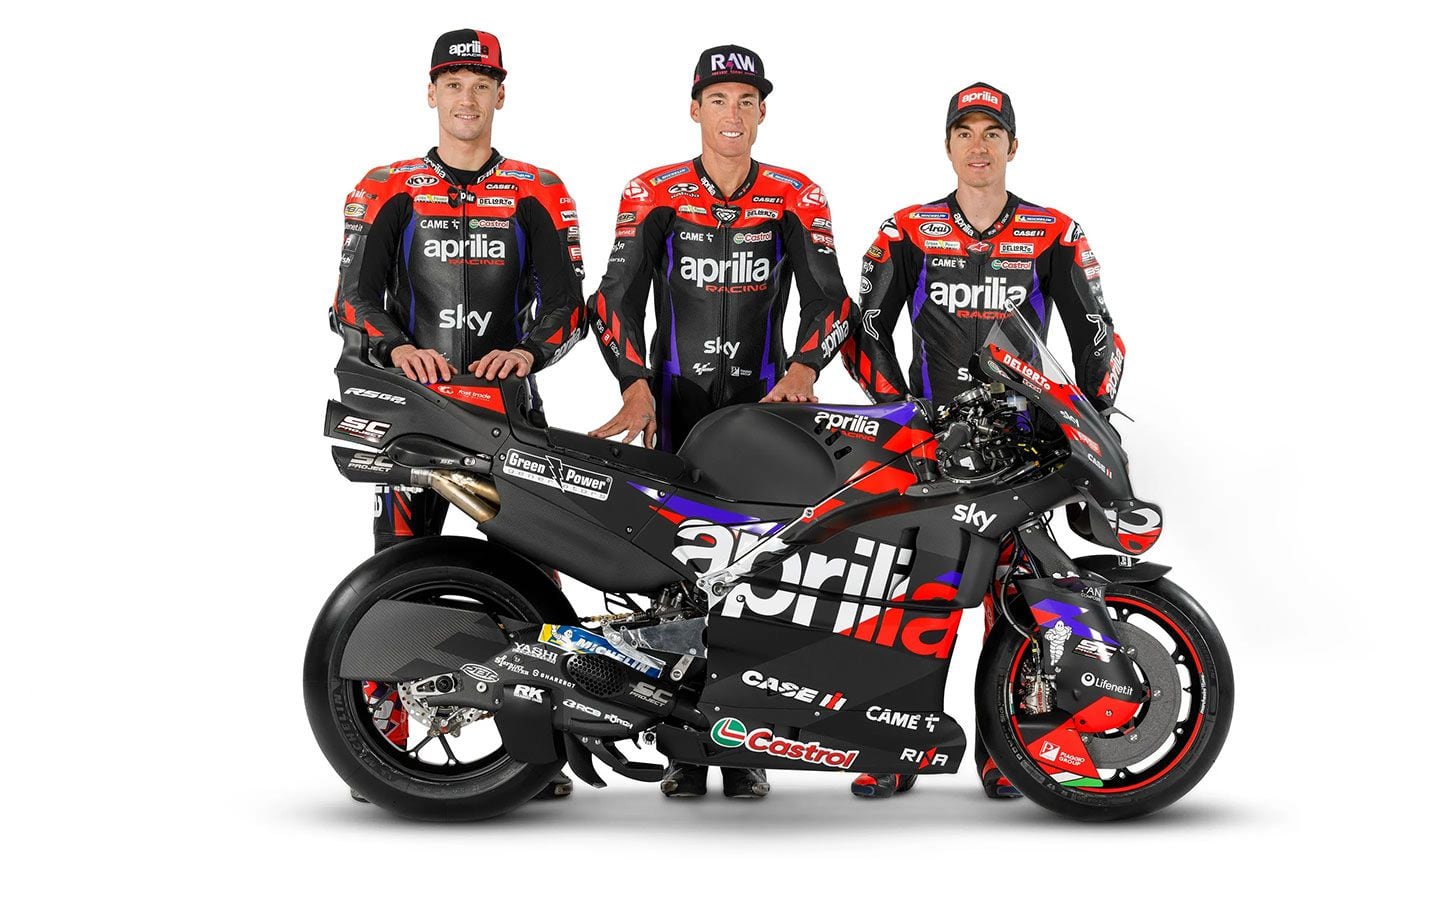 Left to Right: Lorenzo Savadori (official test rider), Espargaró, and Viñales stand behind their latest racebike: the Aprilia RS-GP24.